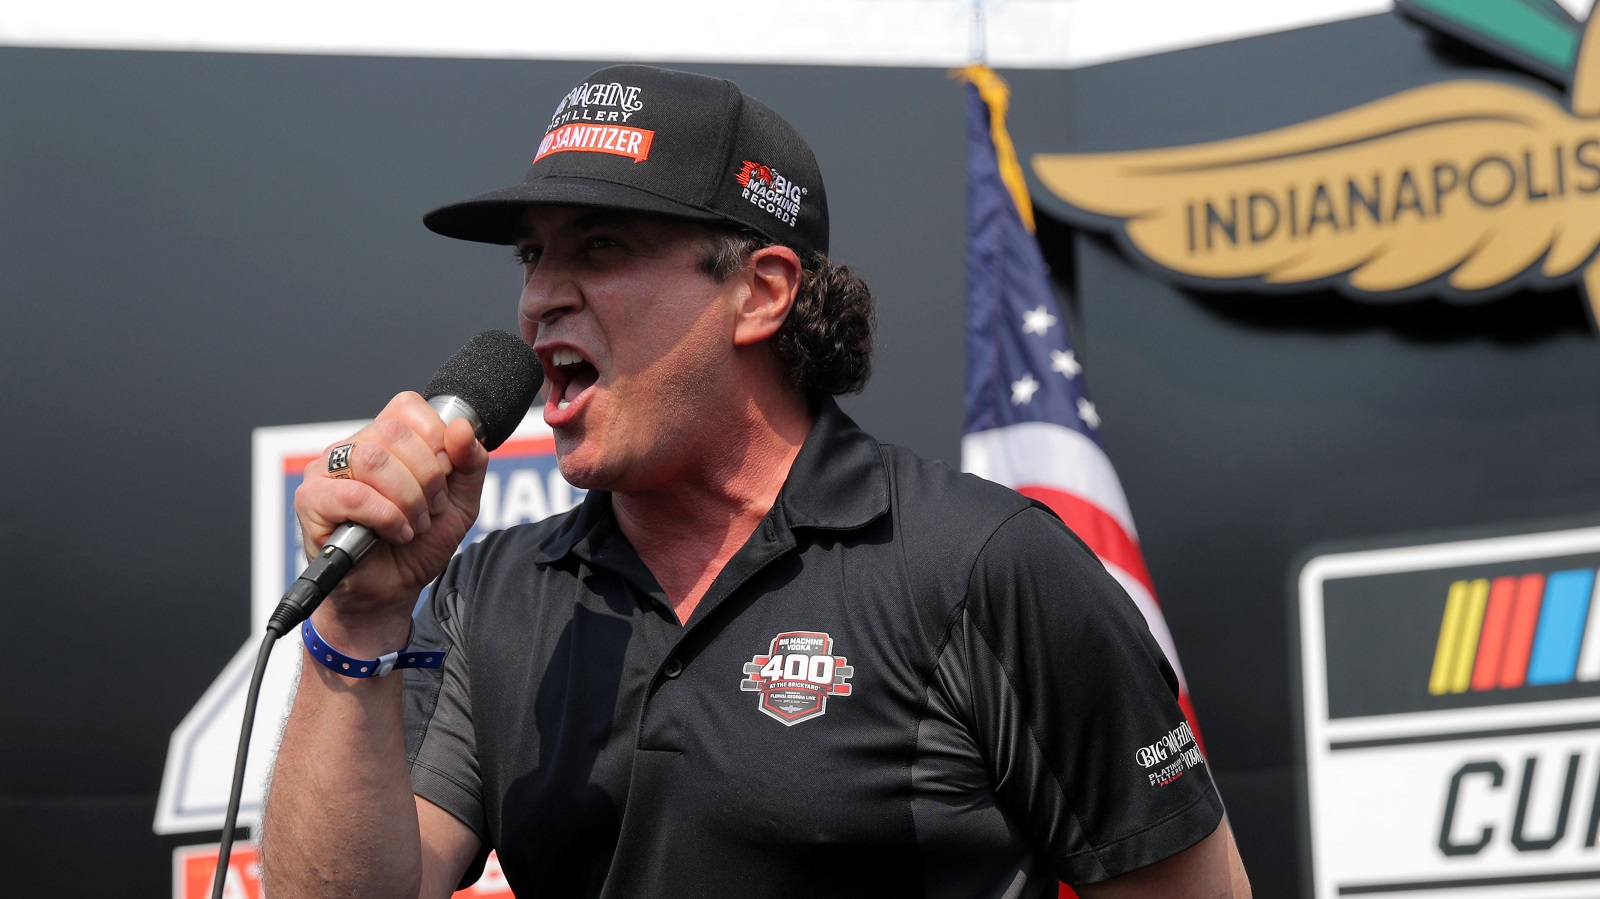 Scott Borchetta gives the command to start engines prior to the NASCAR Cup Series Big Machine Hand Sanitizer 400 at Indianapolis Motor Speedway on July 5, 2020.